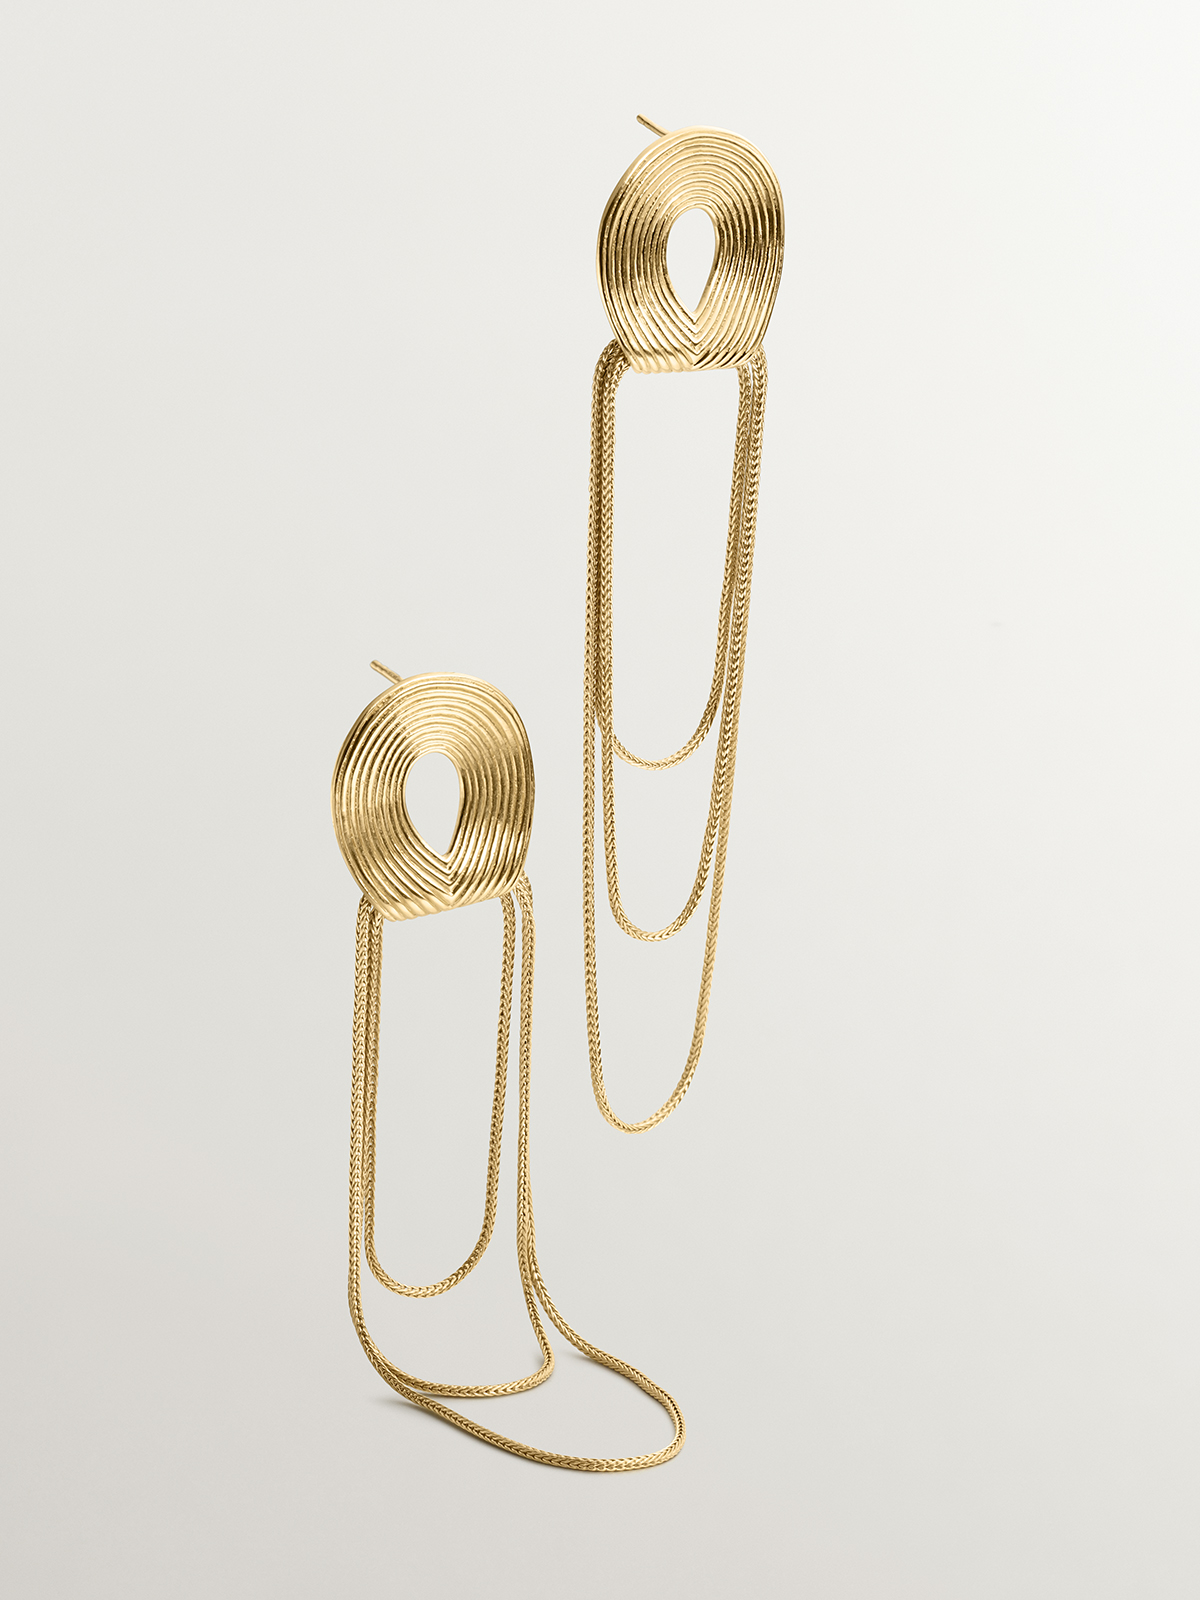 Large 925 silver earrings bathed in 18K yellow gold with relief and chains